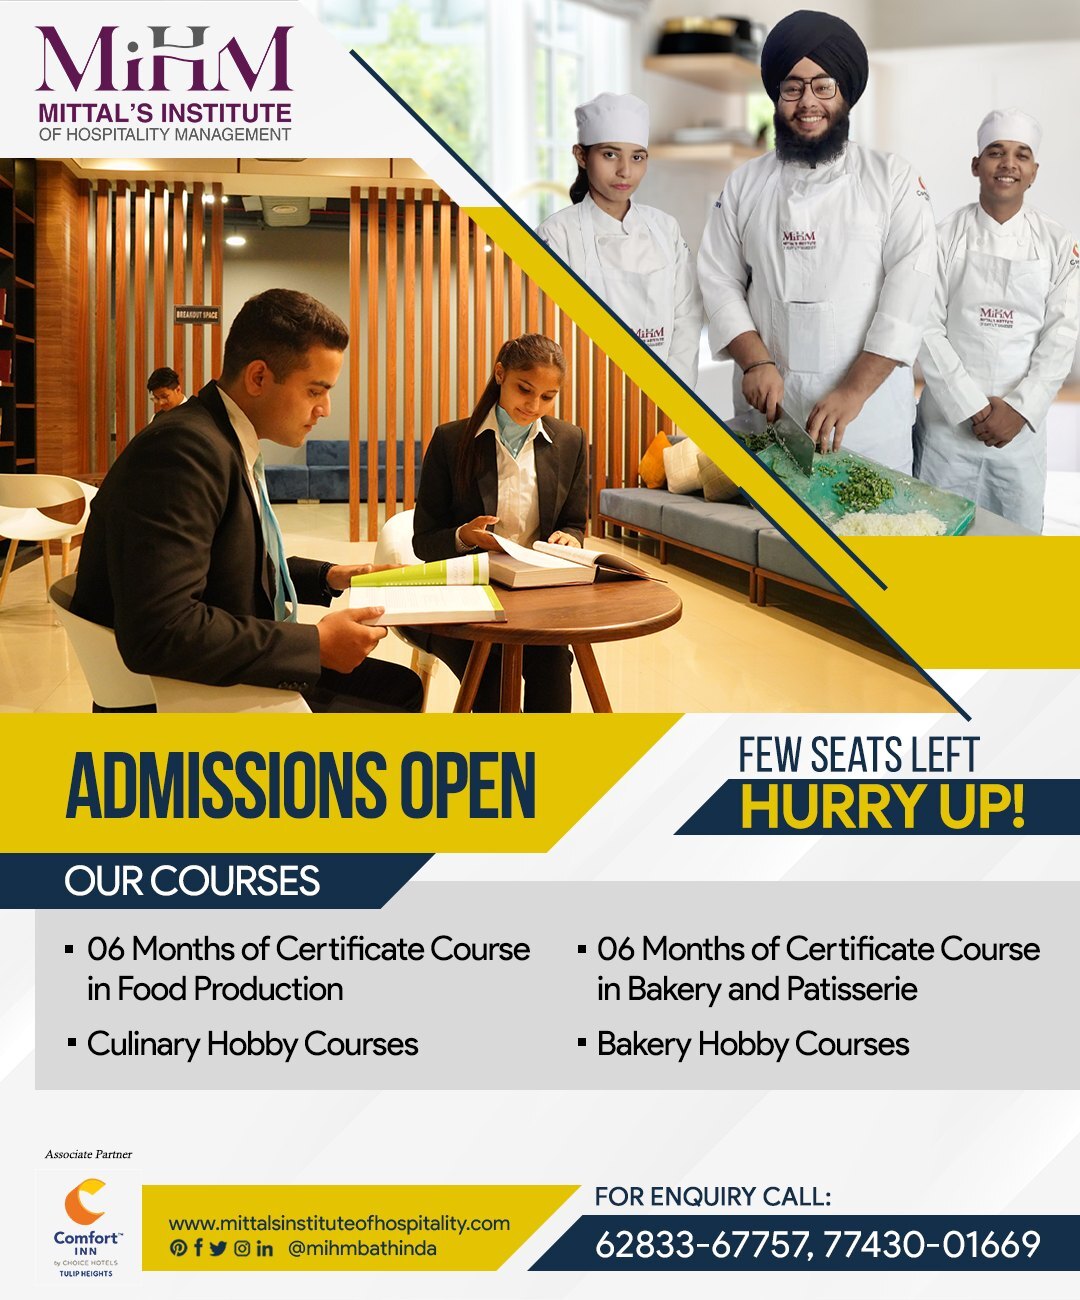 Mittal's Institute of Hospitality: The Best Hotel Management Institute in Bathinda